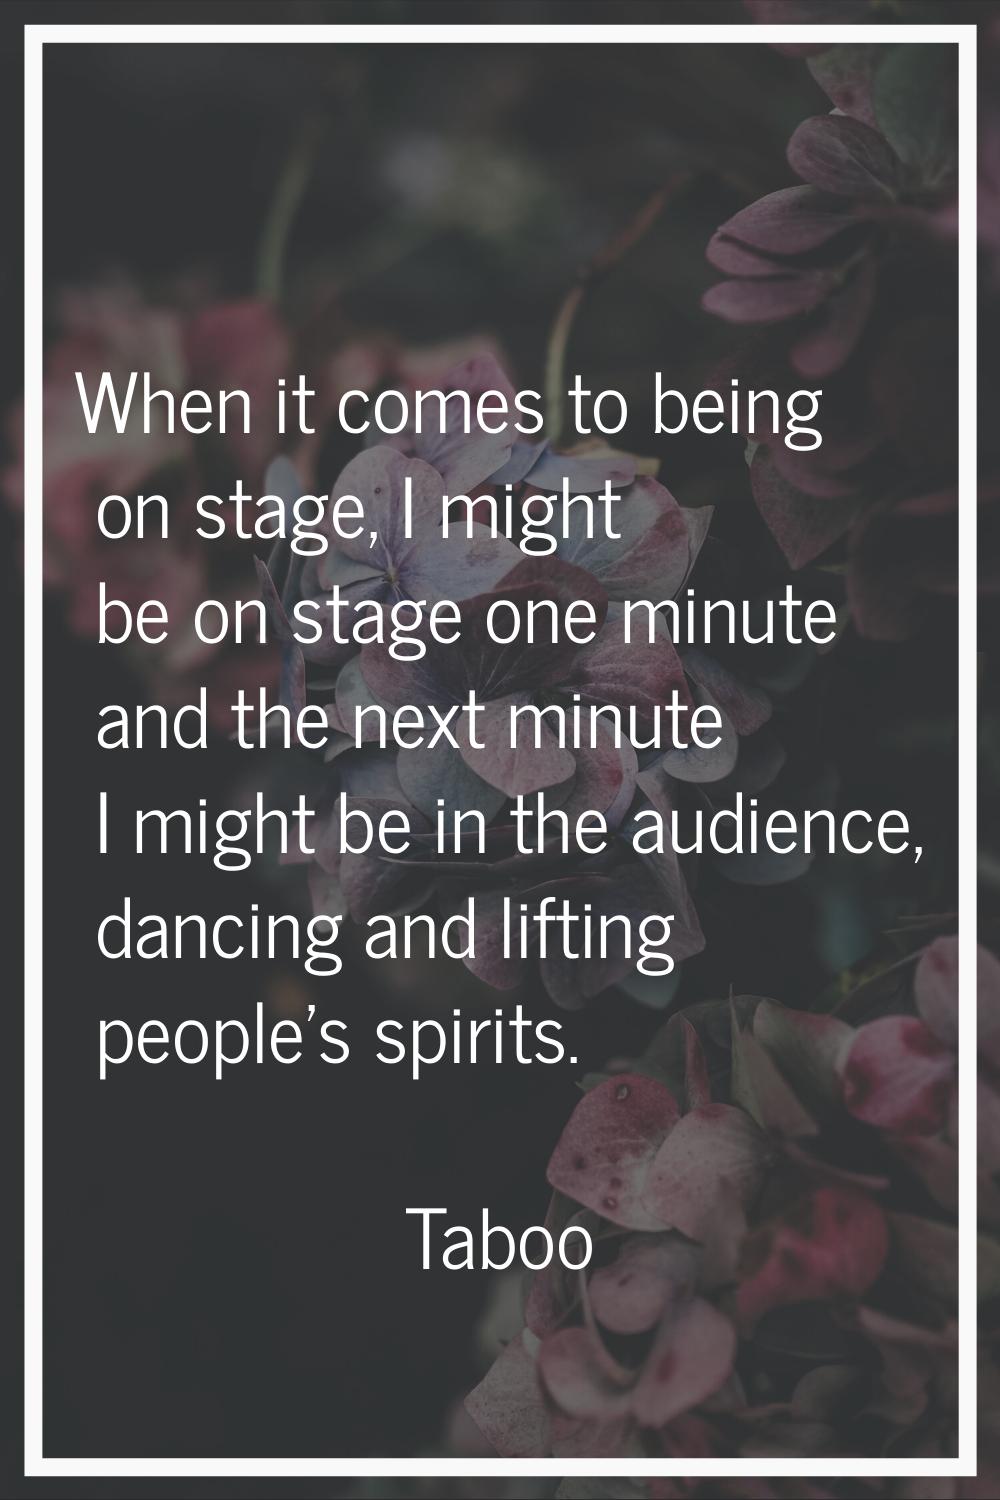 When it comes to being on stage, I might be on stage one minute and the next minute I might be in t